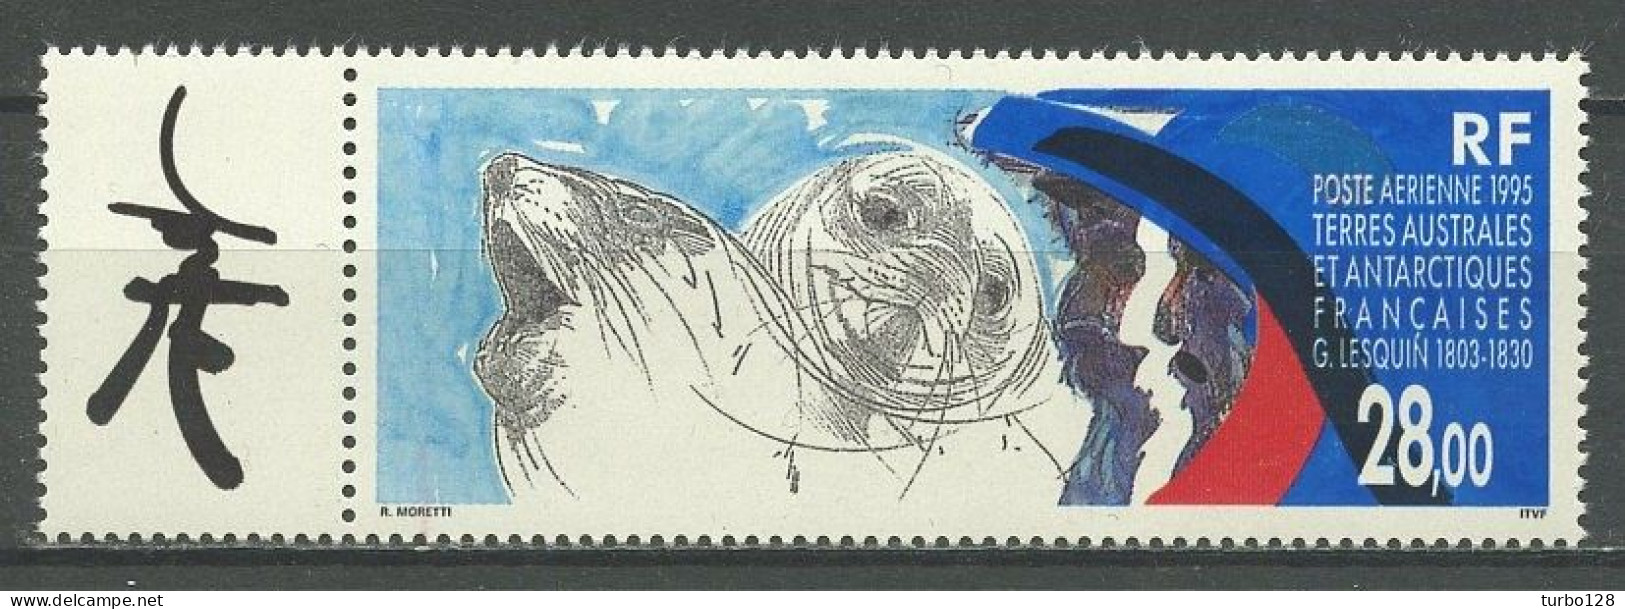 TAAF 1995 PA N° 136 ** Neuf MNH Superbe C 14,20 € Faune Animaux Animals - G. Lesquin Phoques - Corréo Aéreo